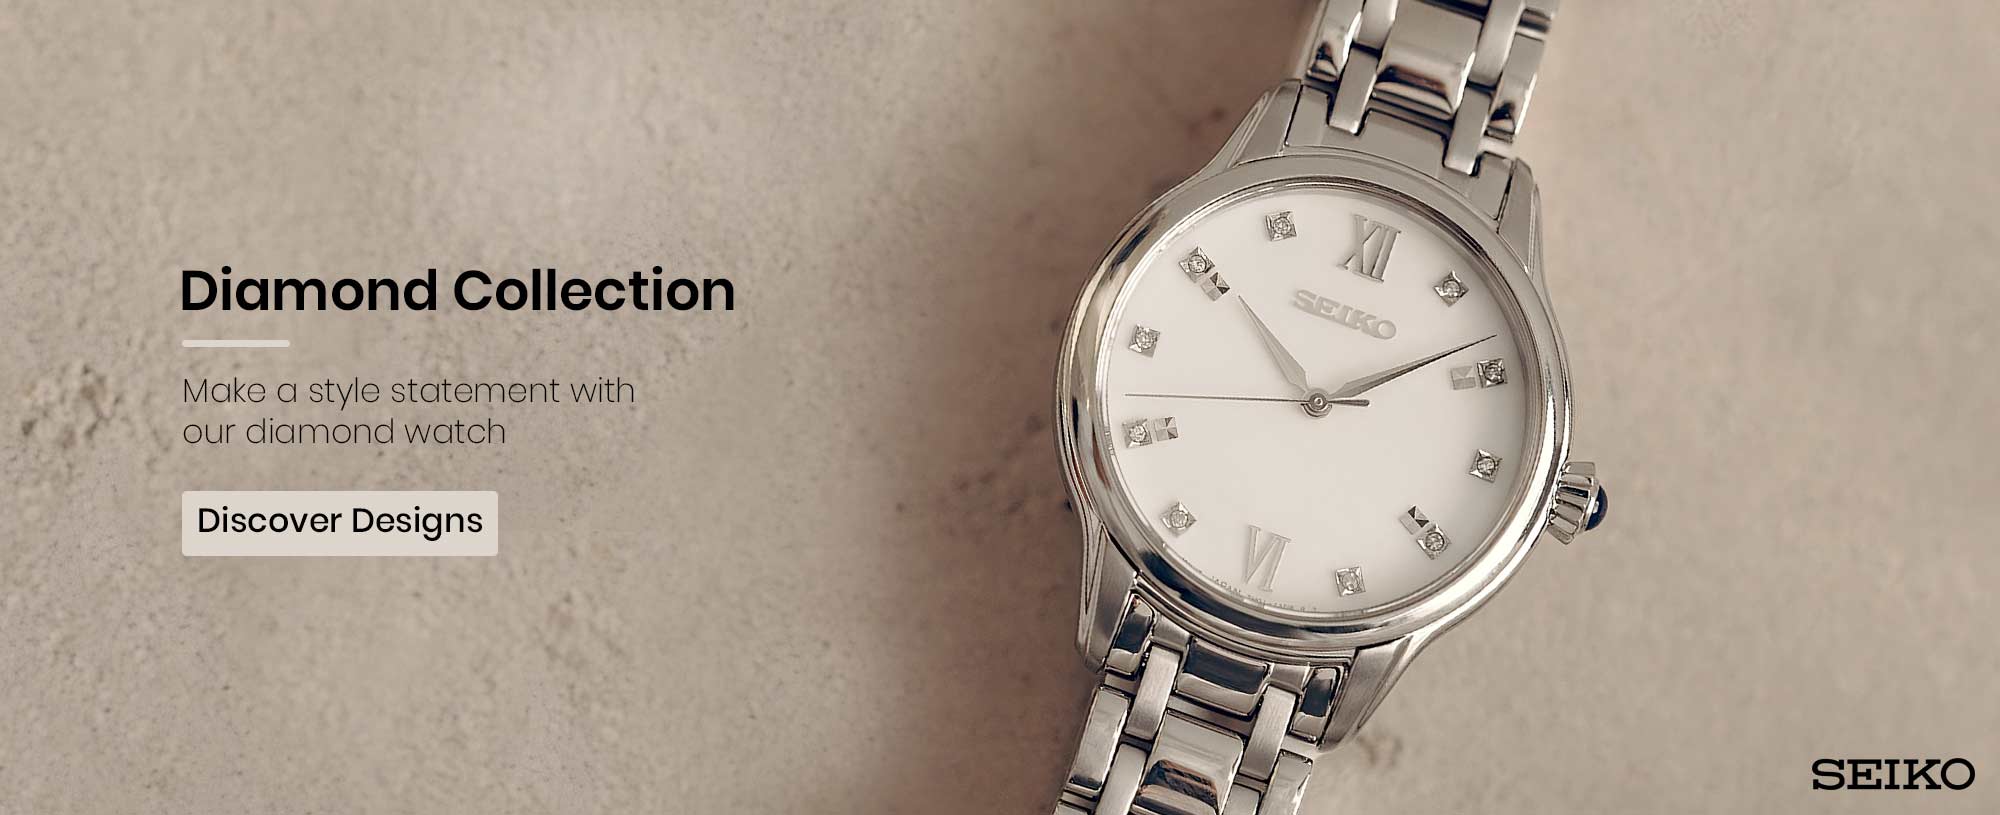 diamond-collection-Watches at Keepsakes Jewelry